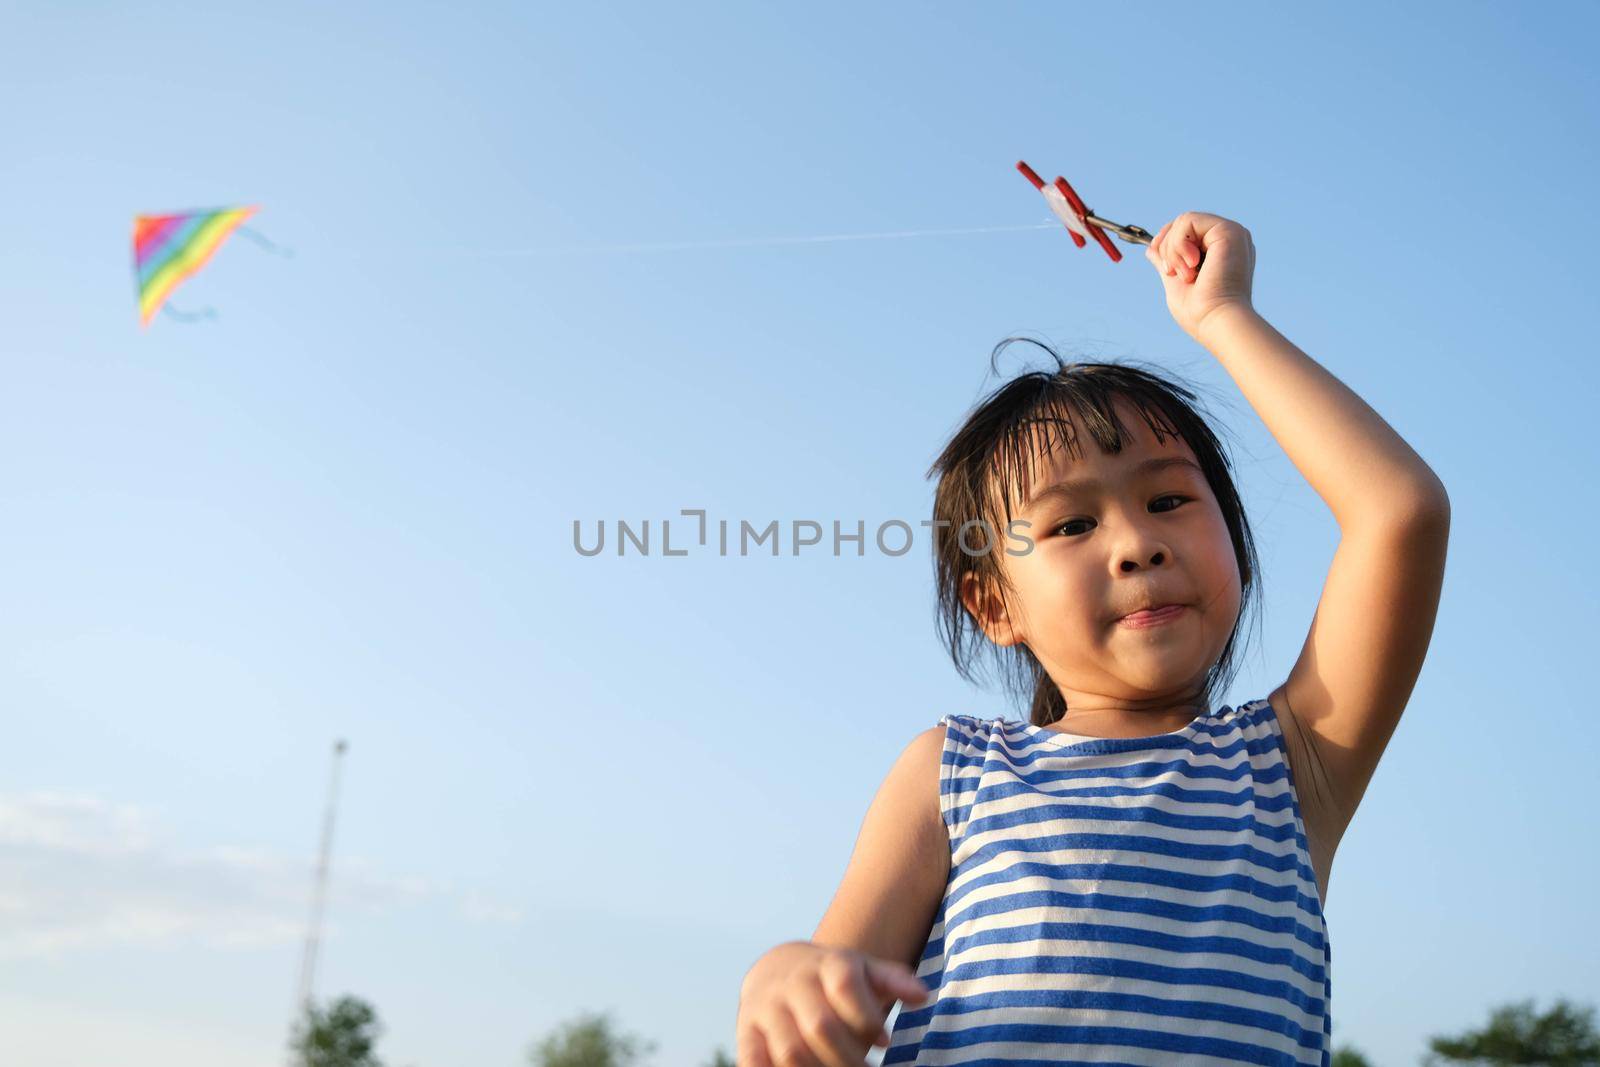 Child playing with a kite while running on a meadow by the lake at sunset. Healthy summer activity for children. Funny time with family.